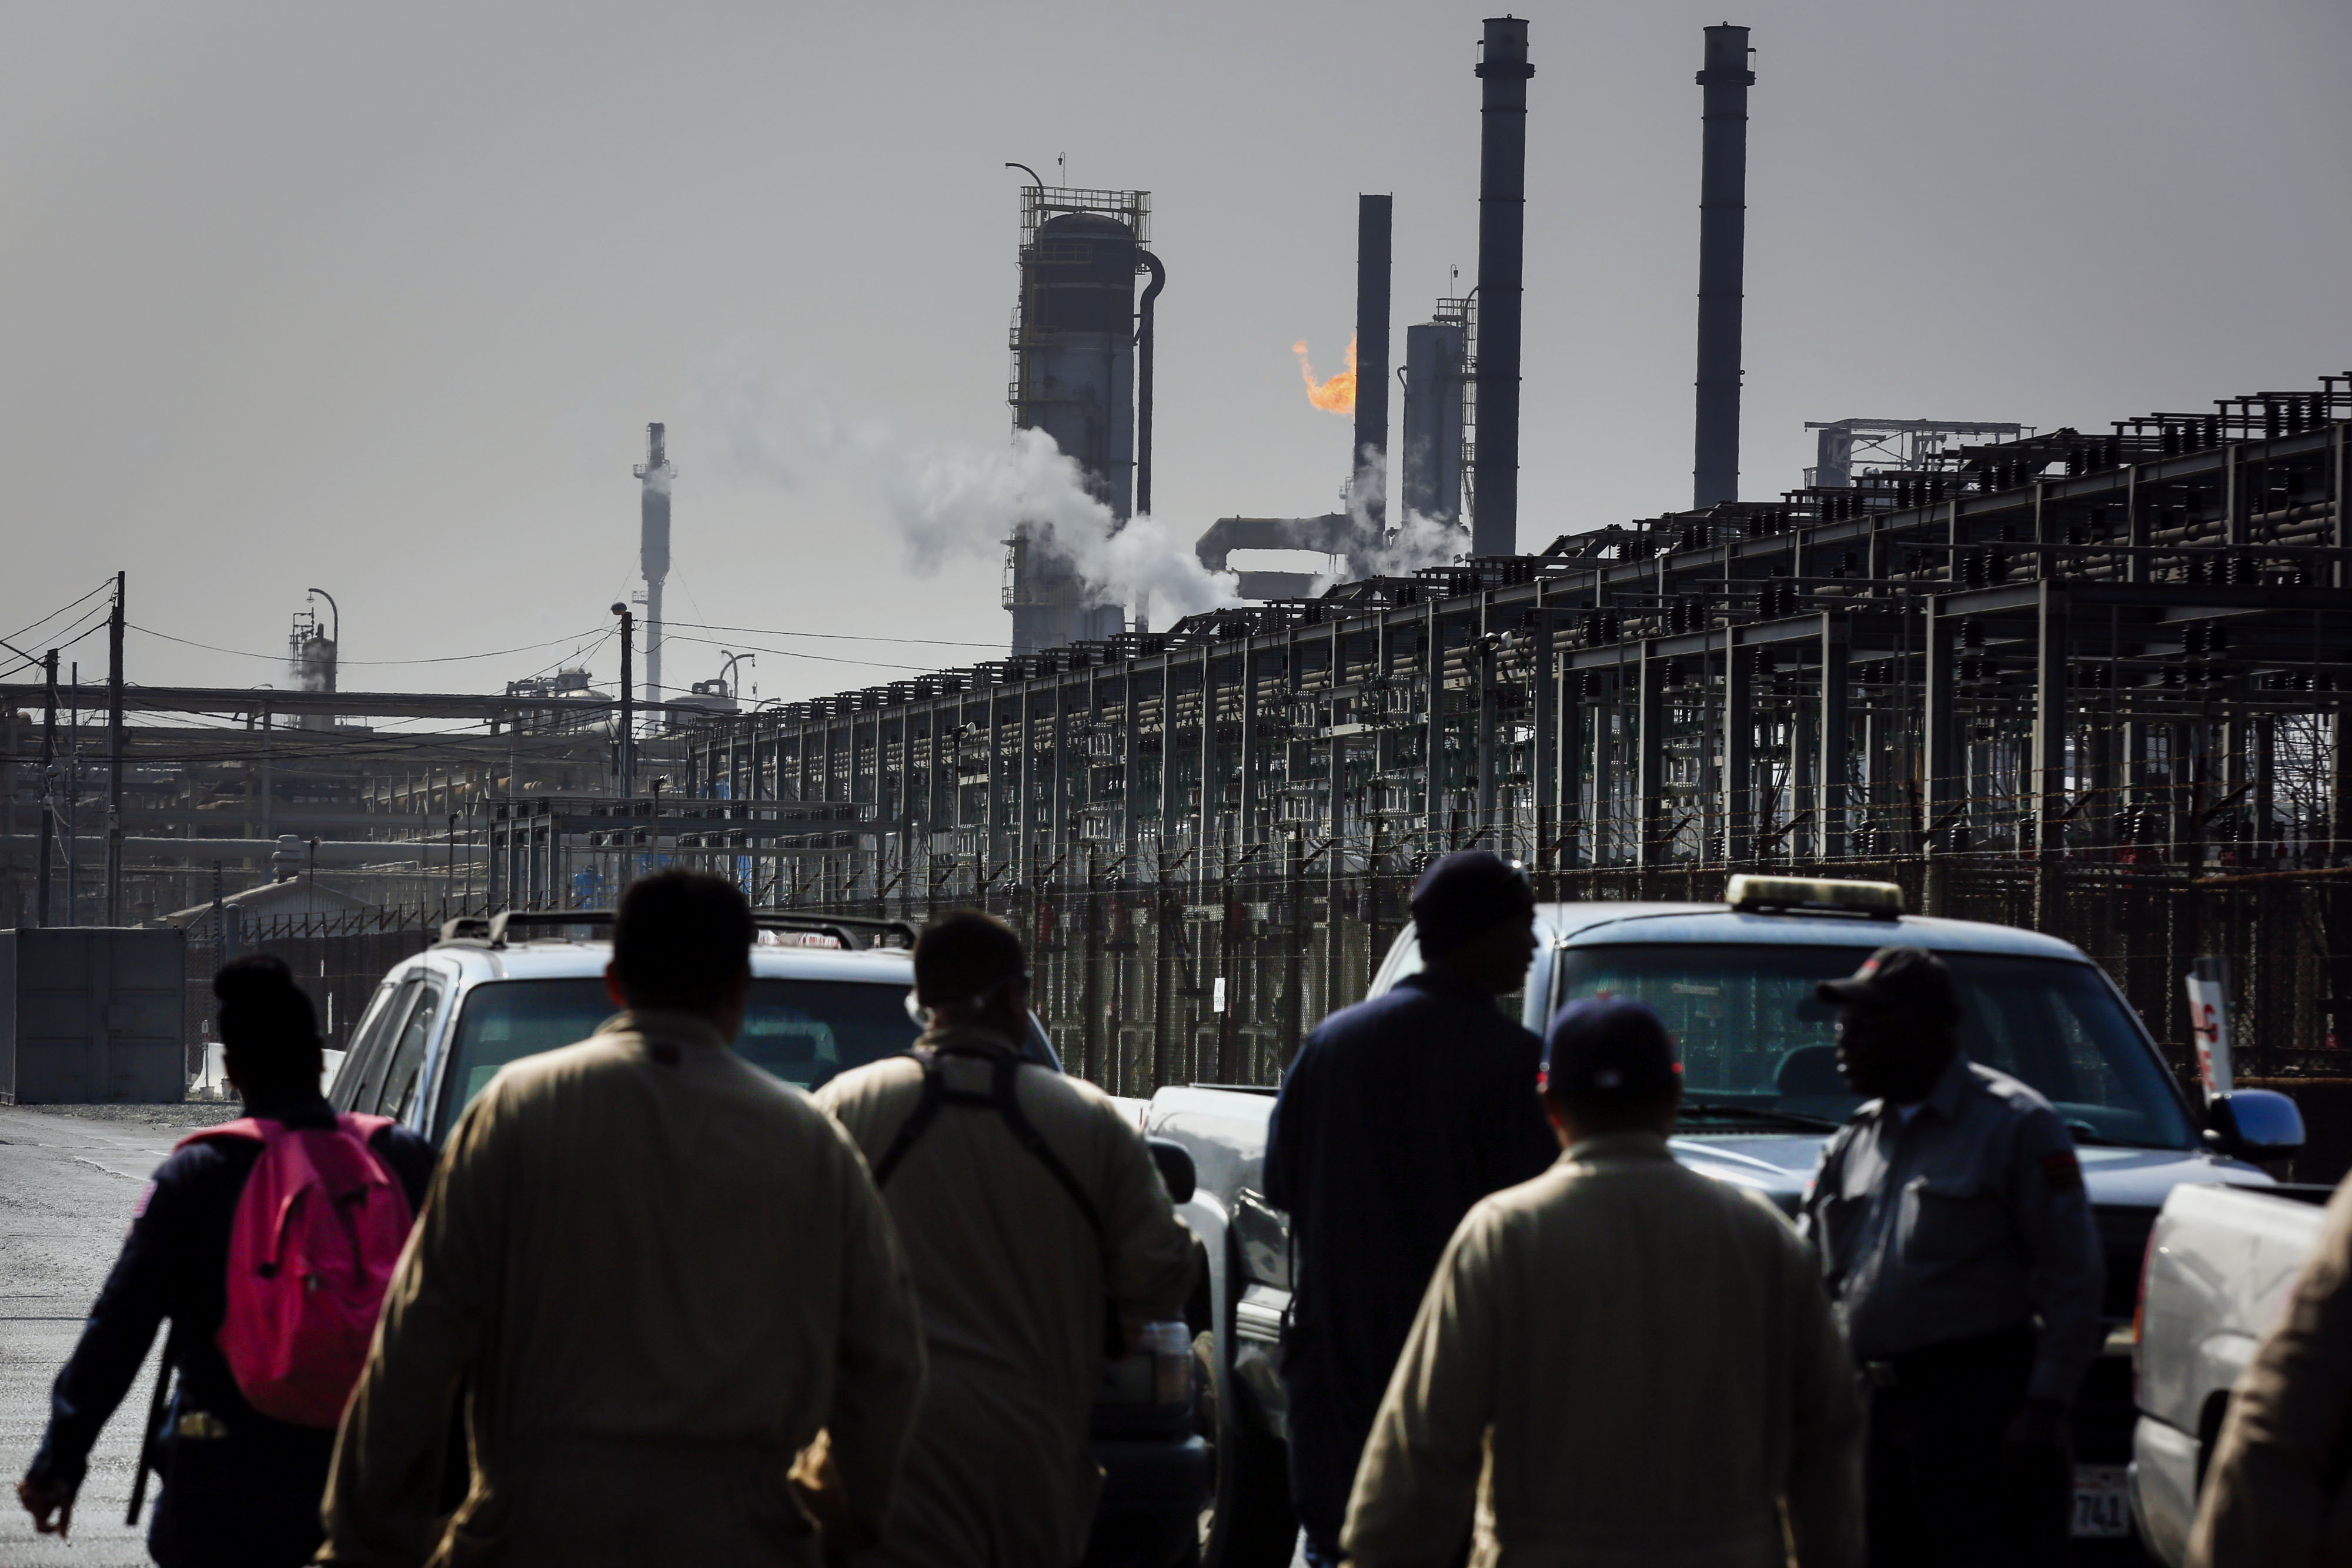 A flare burns overhead as workers enter Gate 7 at the Exxon Mobil Corp. Torrance refinery in Los Angeles on Feb. 18, 2015. (Patrick T. Fallon—Bloomberg/Getty Images)